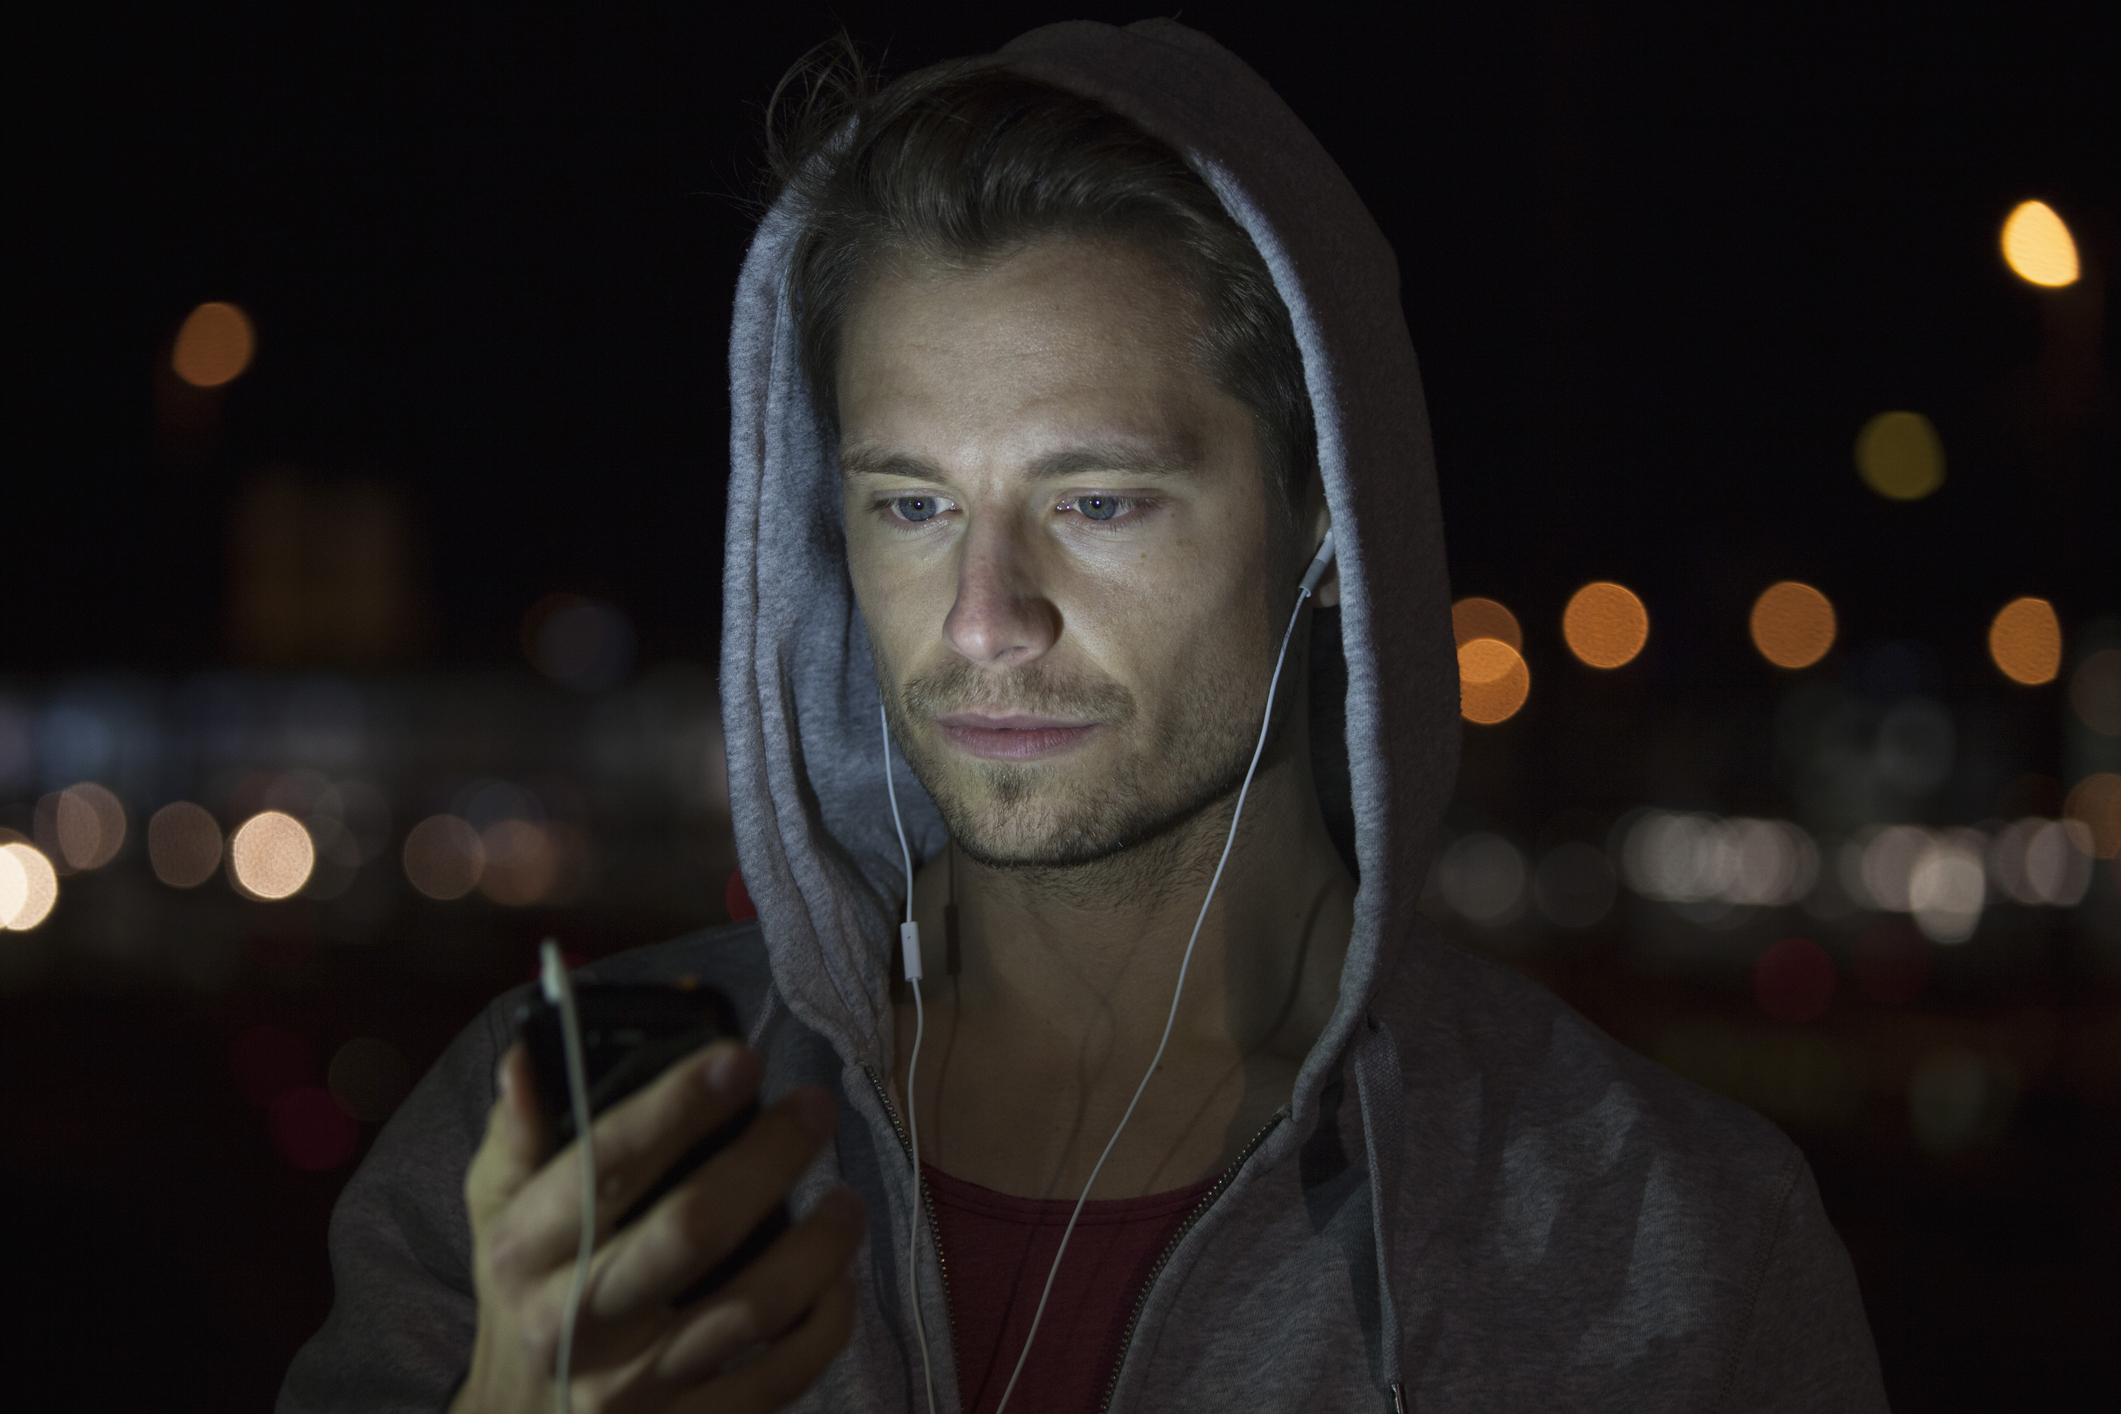 Portrait of young man wearing hooded jacket listening music at night